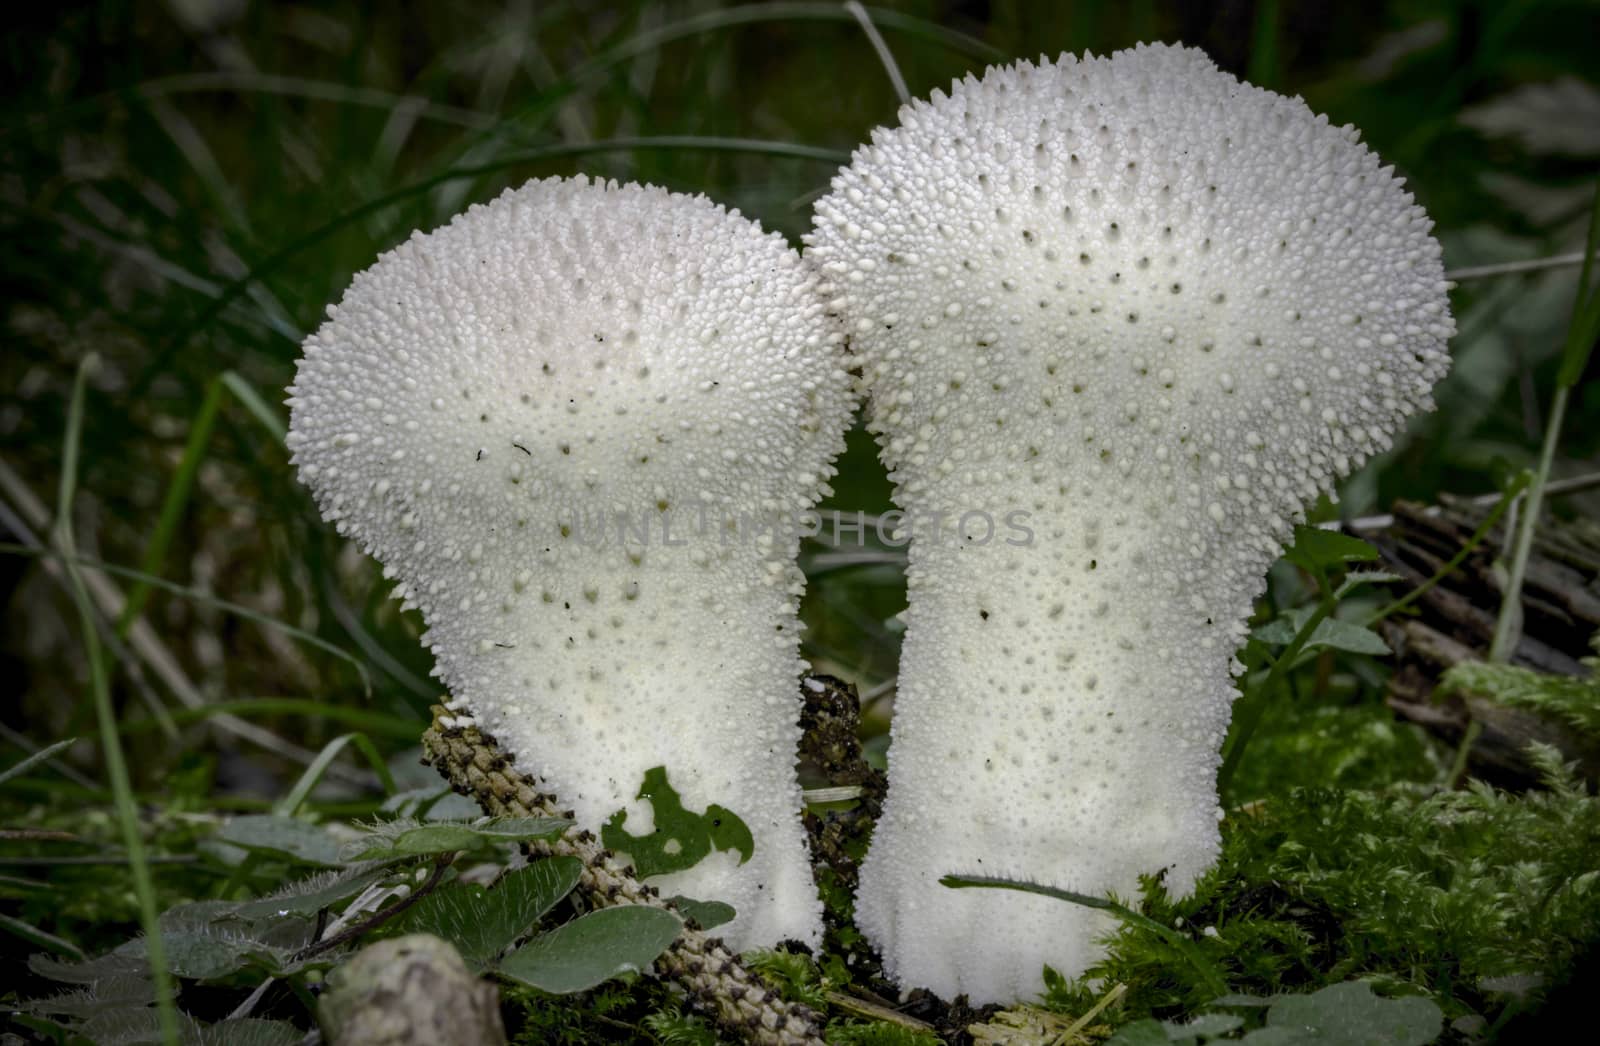 Common Puffball  in Pine Forest  -  Lycoperdon perlatum (Pers., 1796) by gstalker